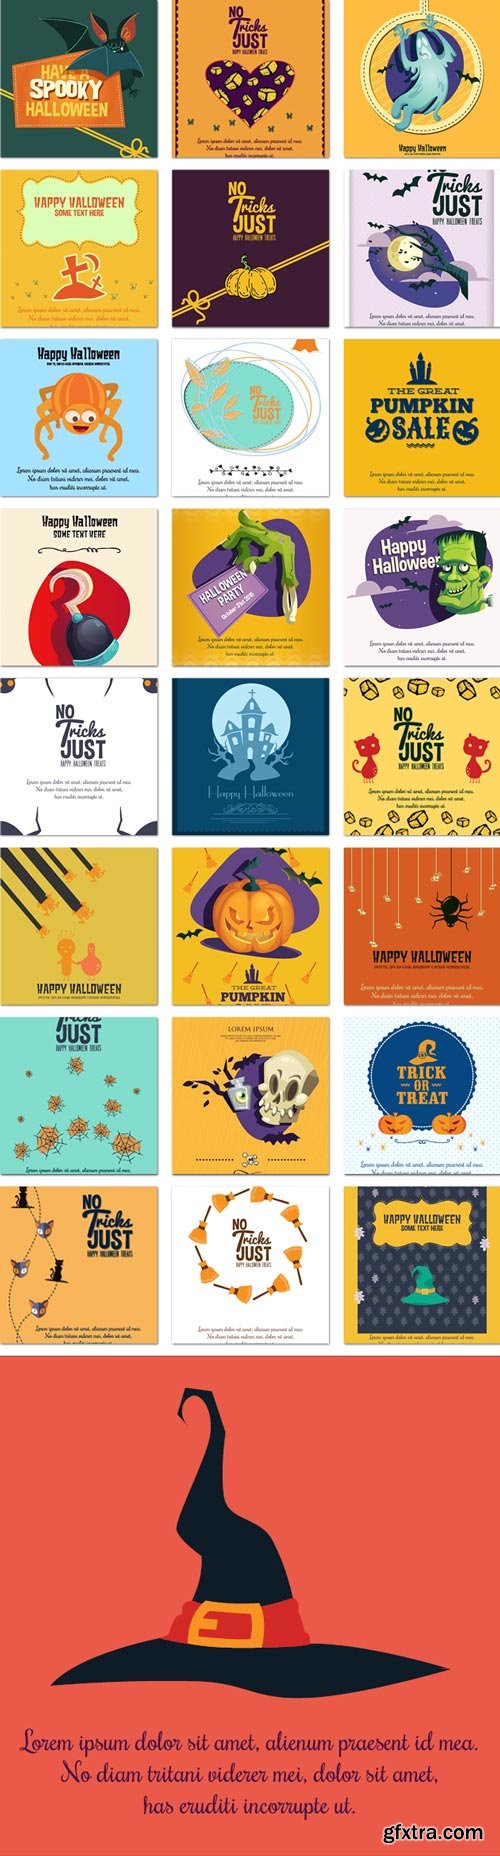 Get 300 Premium Vector Illustrations from 12 Different Categories at 98% OFF